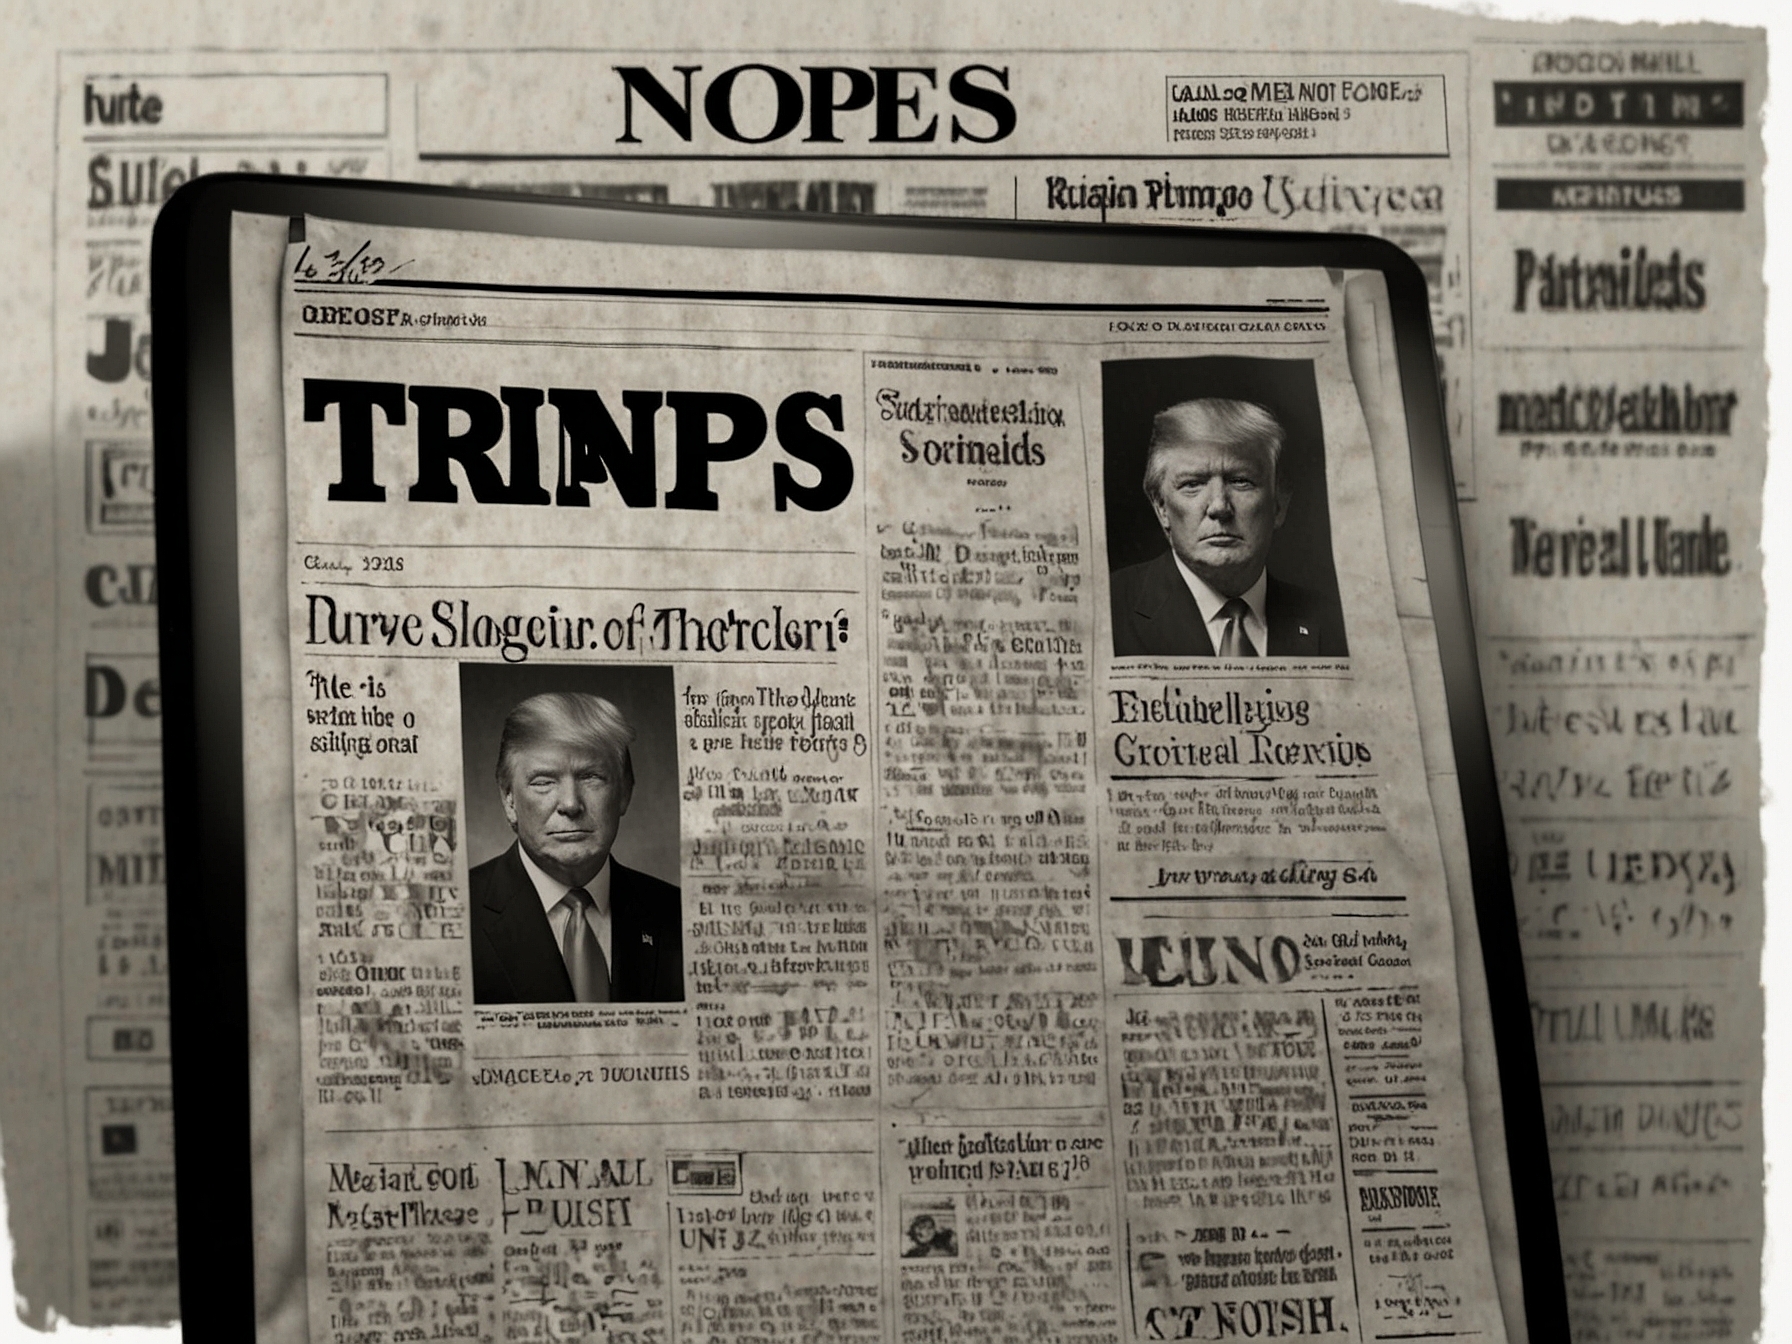 An illustration depicting a computer screen showing the Snopes website alongside a newspaper headline about Trump, emphasizing the media scrutiny he faced during his presidency.